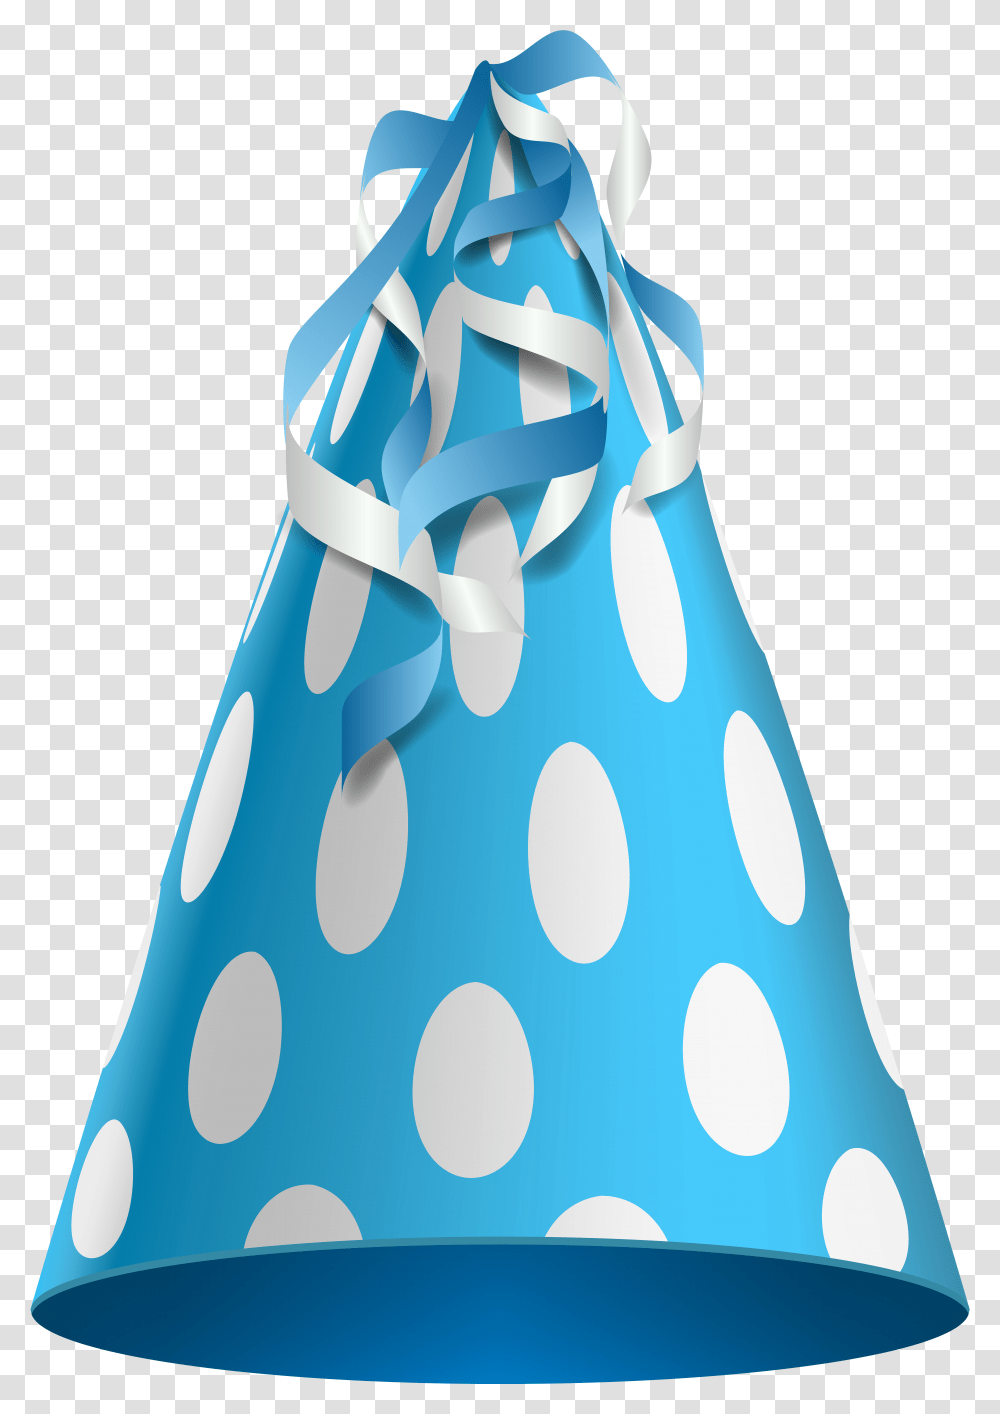 Clip Art Blue Birthday Hat, Clothing, Apparel, Party Hat, Birthday Cake Transparent Png